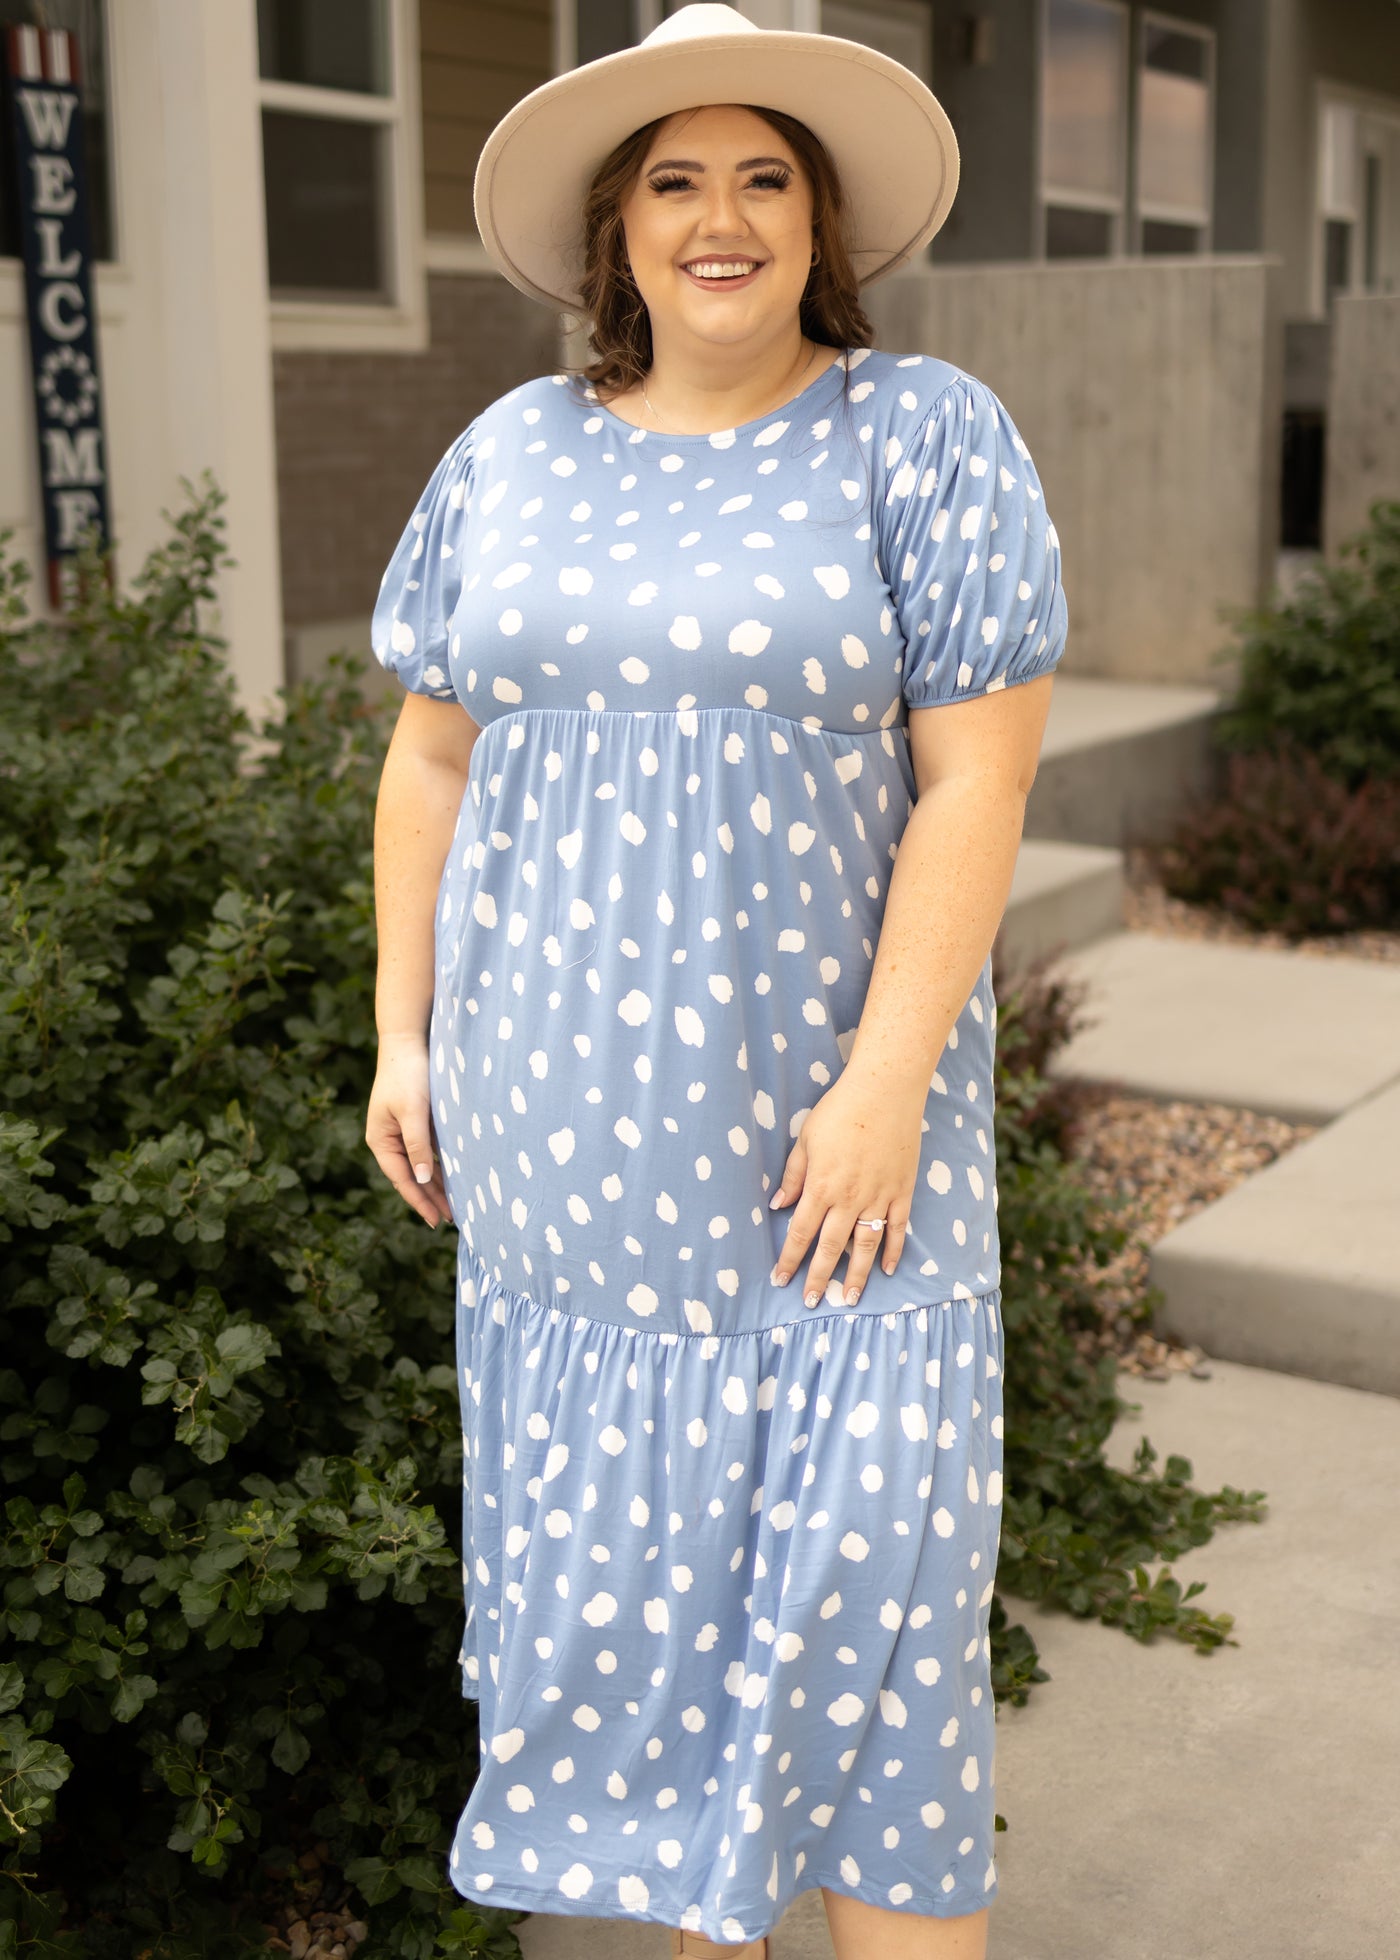 Plus size short sleeve blue dress with white spots